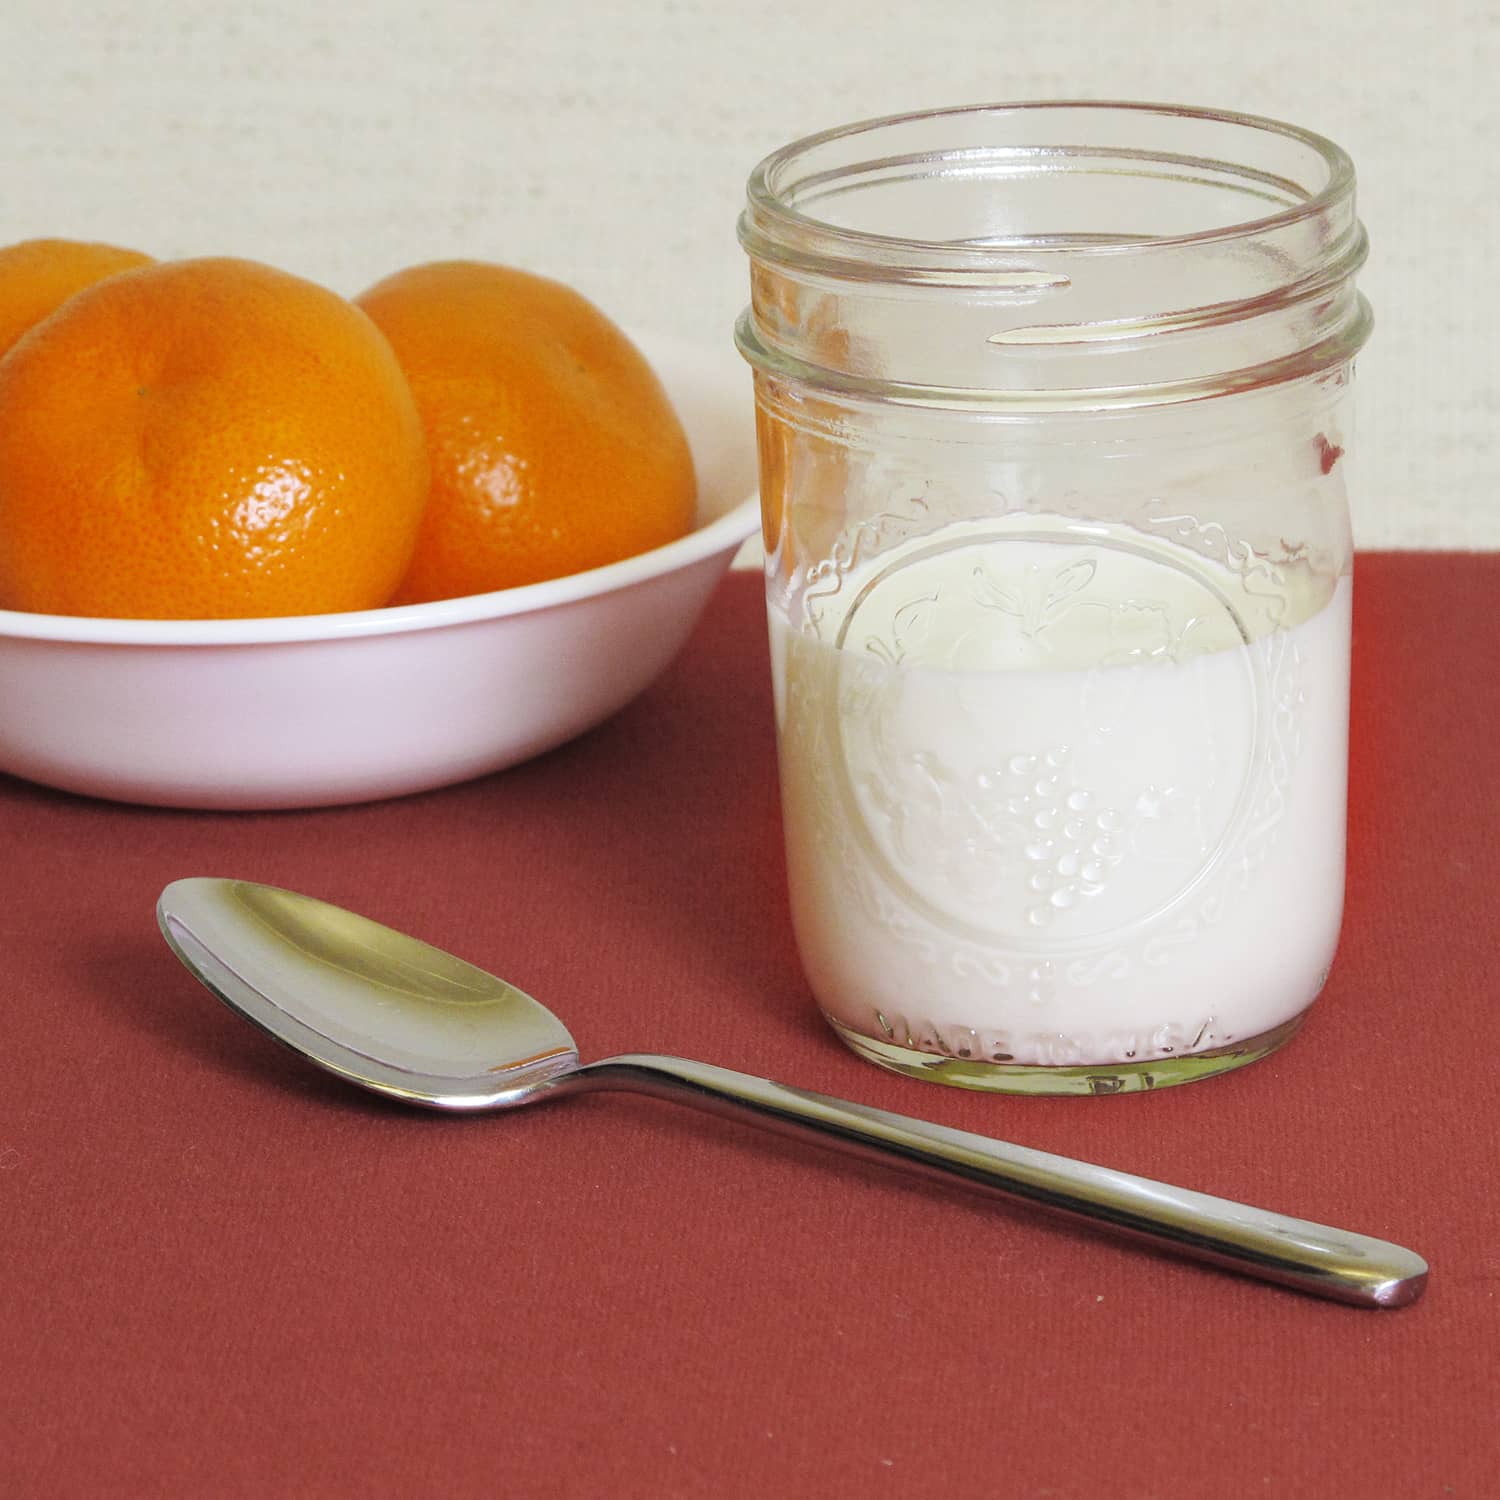 A jar of milk and clementines